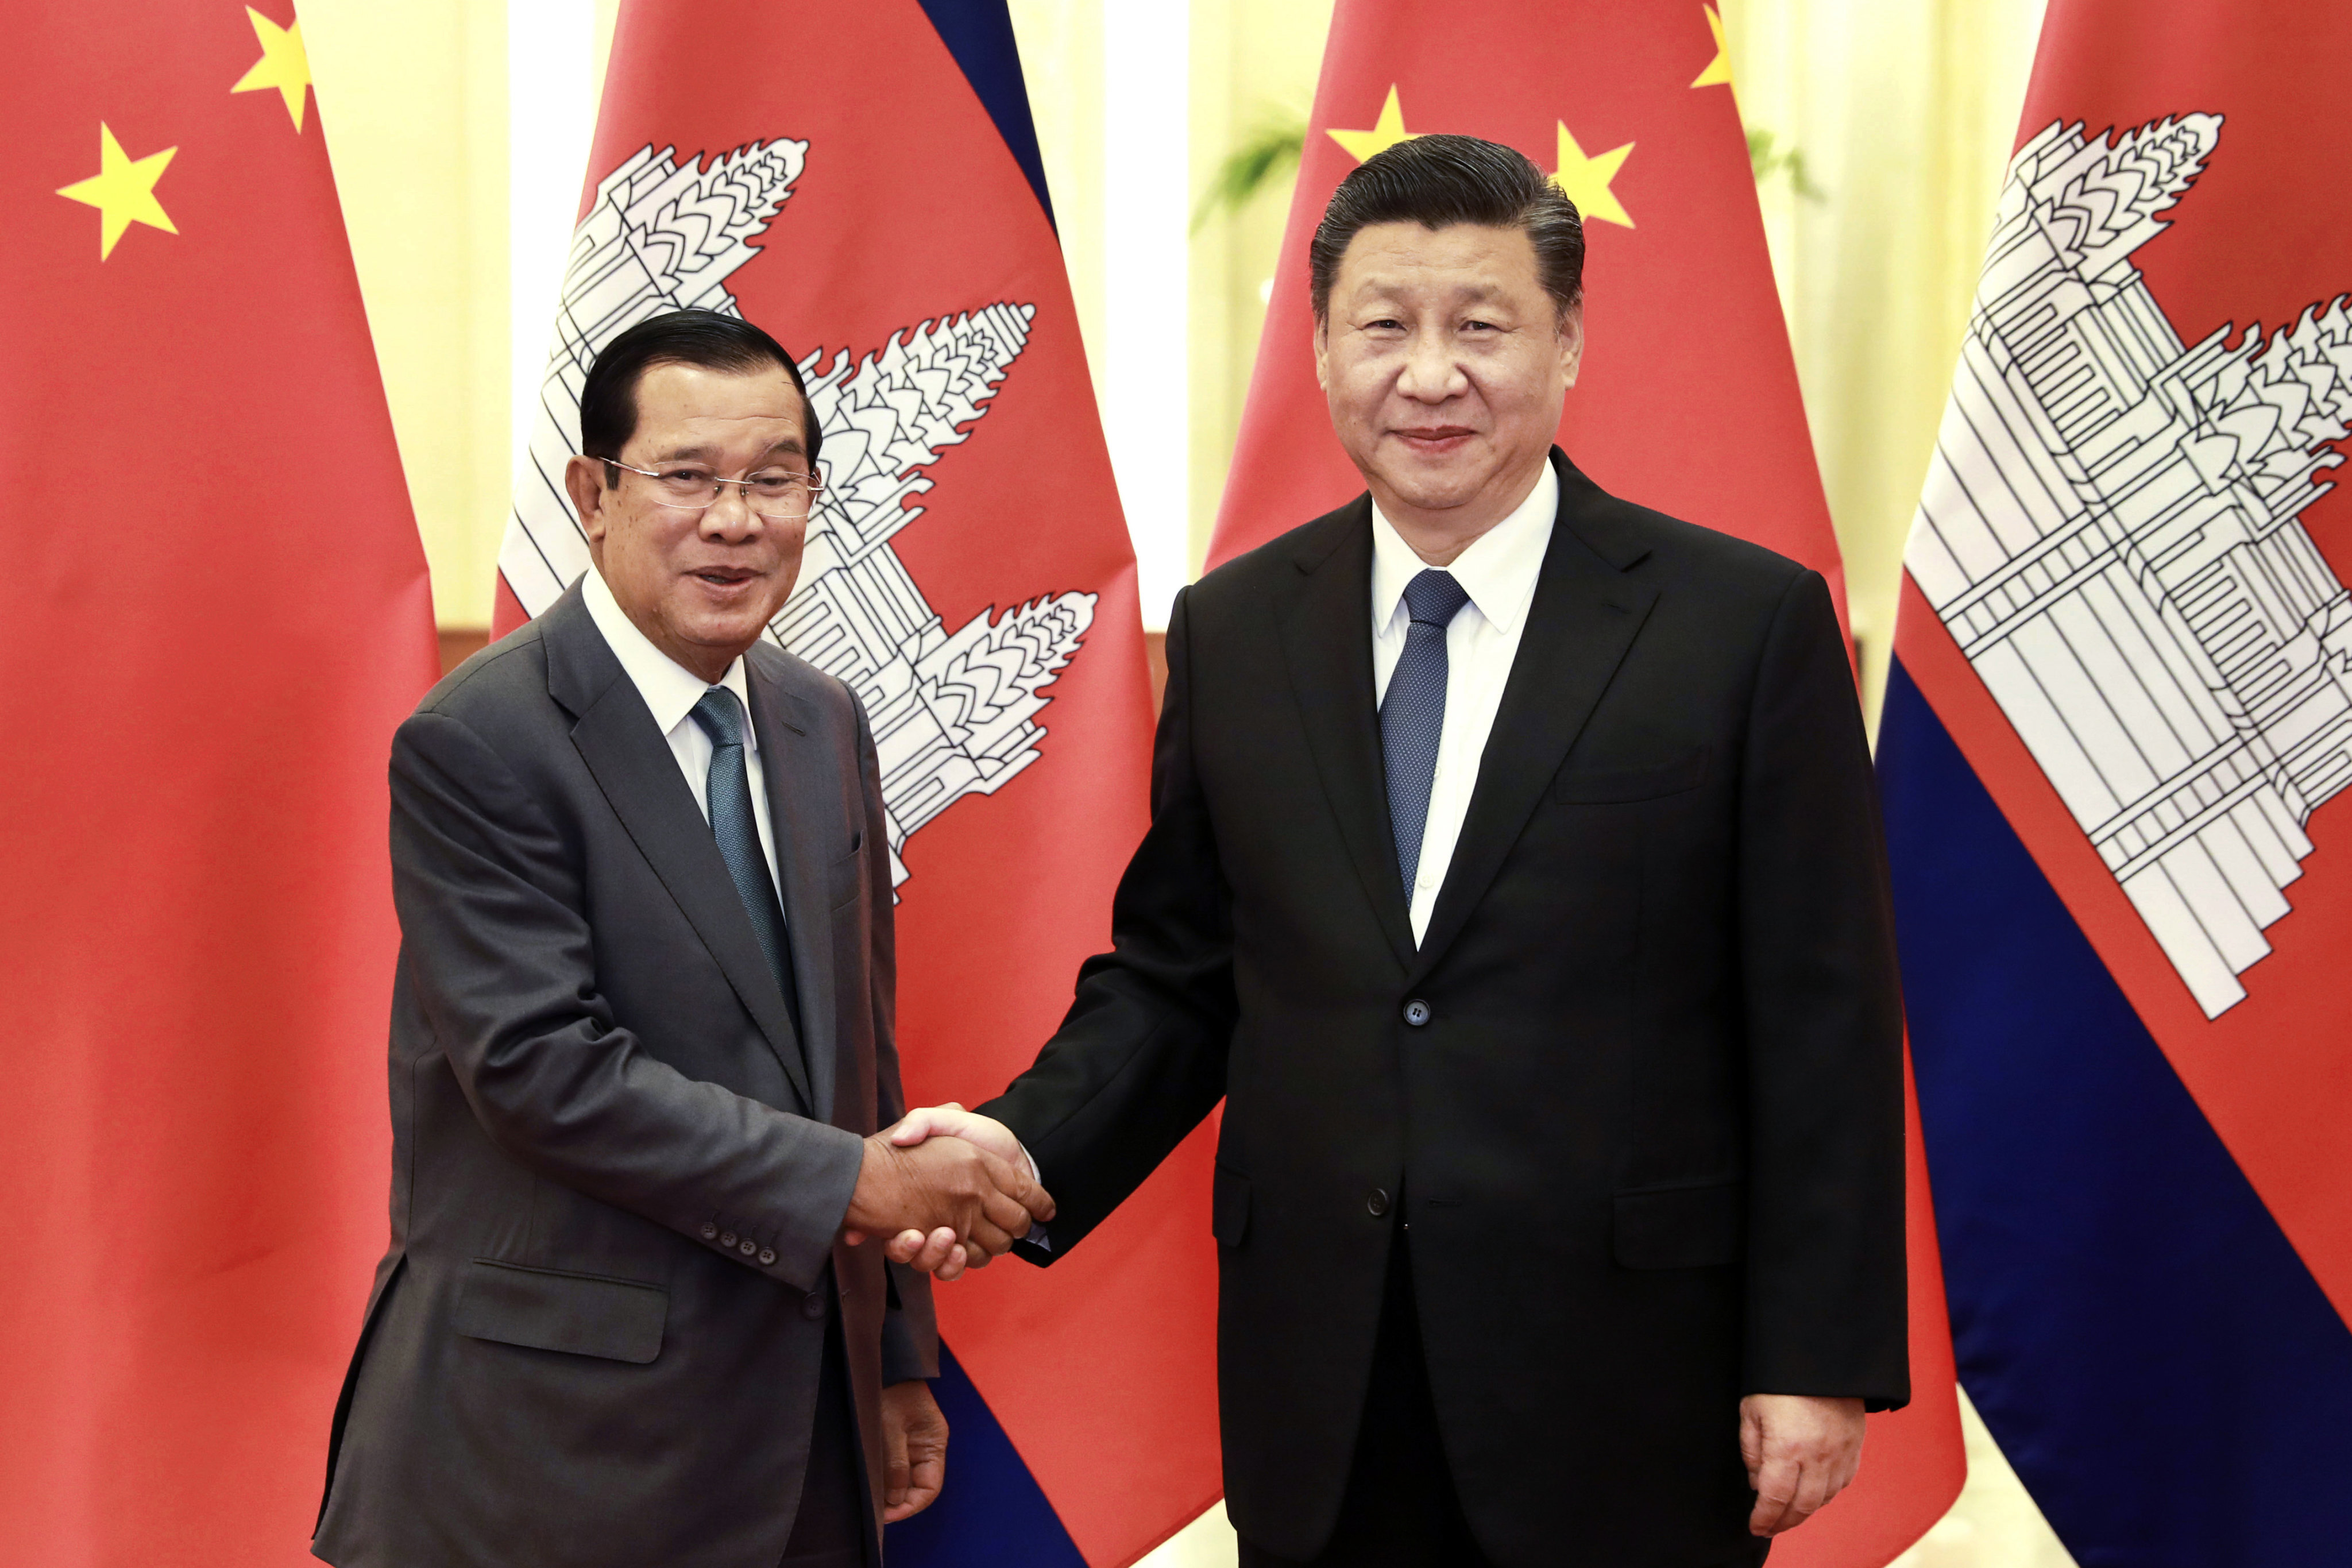 Cambodia’s Prime Minister Hun Sen shakes hands with Chinese President Xi Jinping at Beijing’s Great Hall of the People in early 2020. Photo: Xinhua via AP